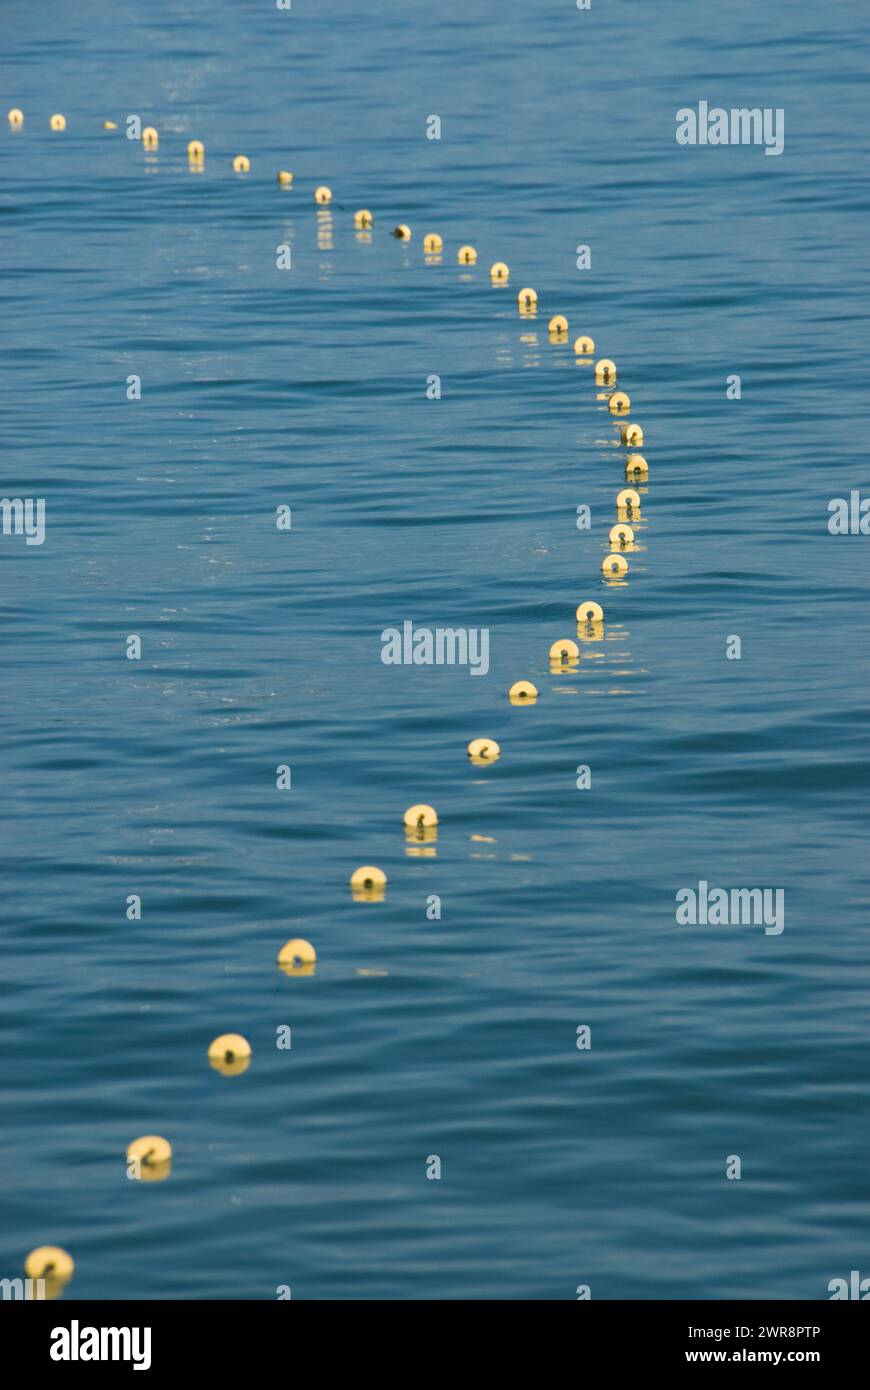 Yellow spheres float peacefully on calm water Stock Photo